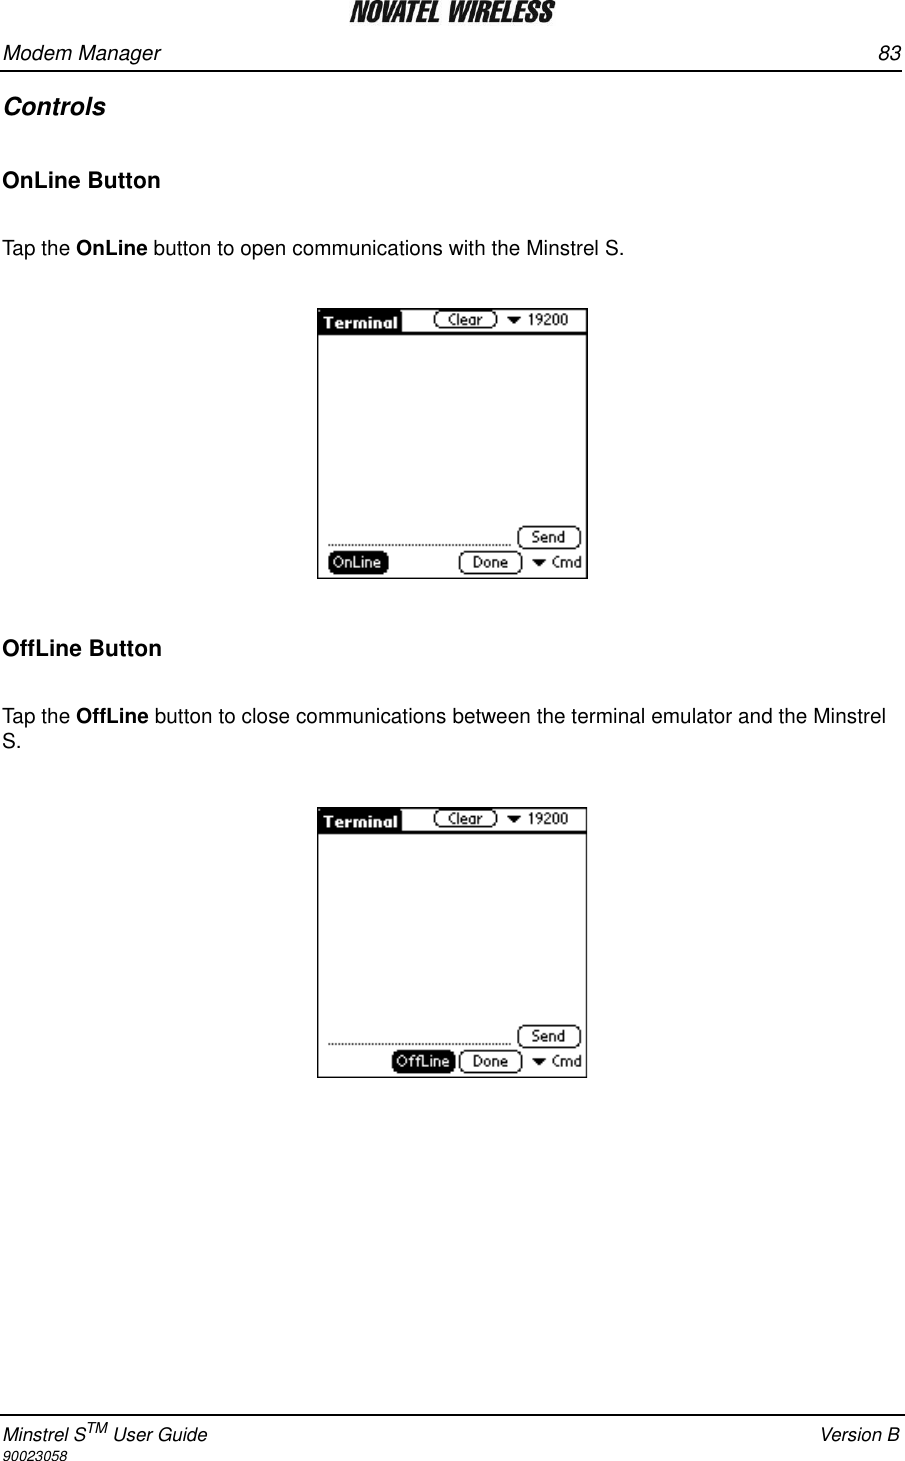 Modem Manager 83Minstrel STM User Guide Version B90023058ControlsOnLine ButtonTap the OnLine button to open communications with the Minstrel S.OffLine ButtonTap the OffLine button to close communications between the terminal emulator and the Minstrel S.